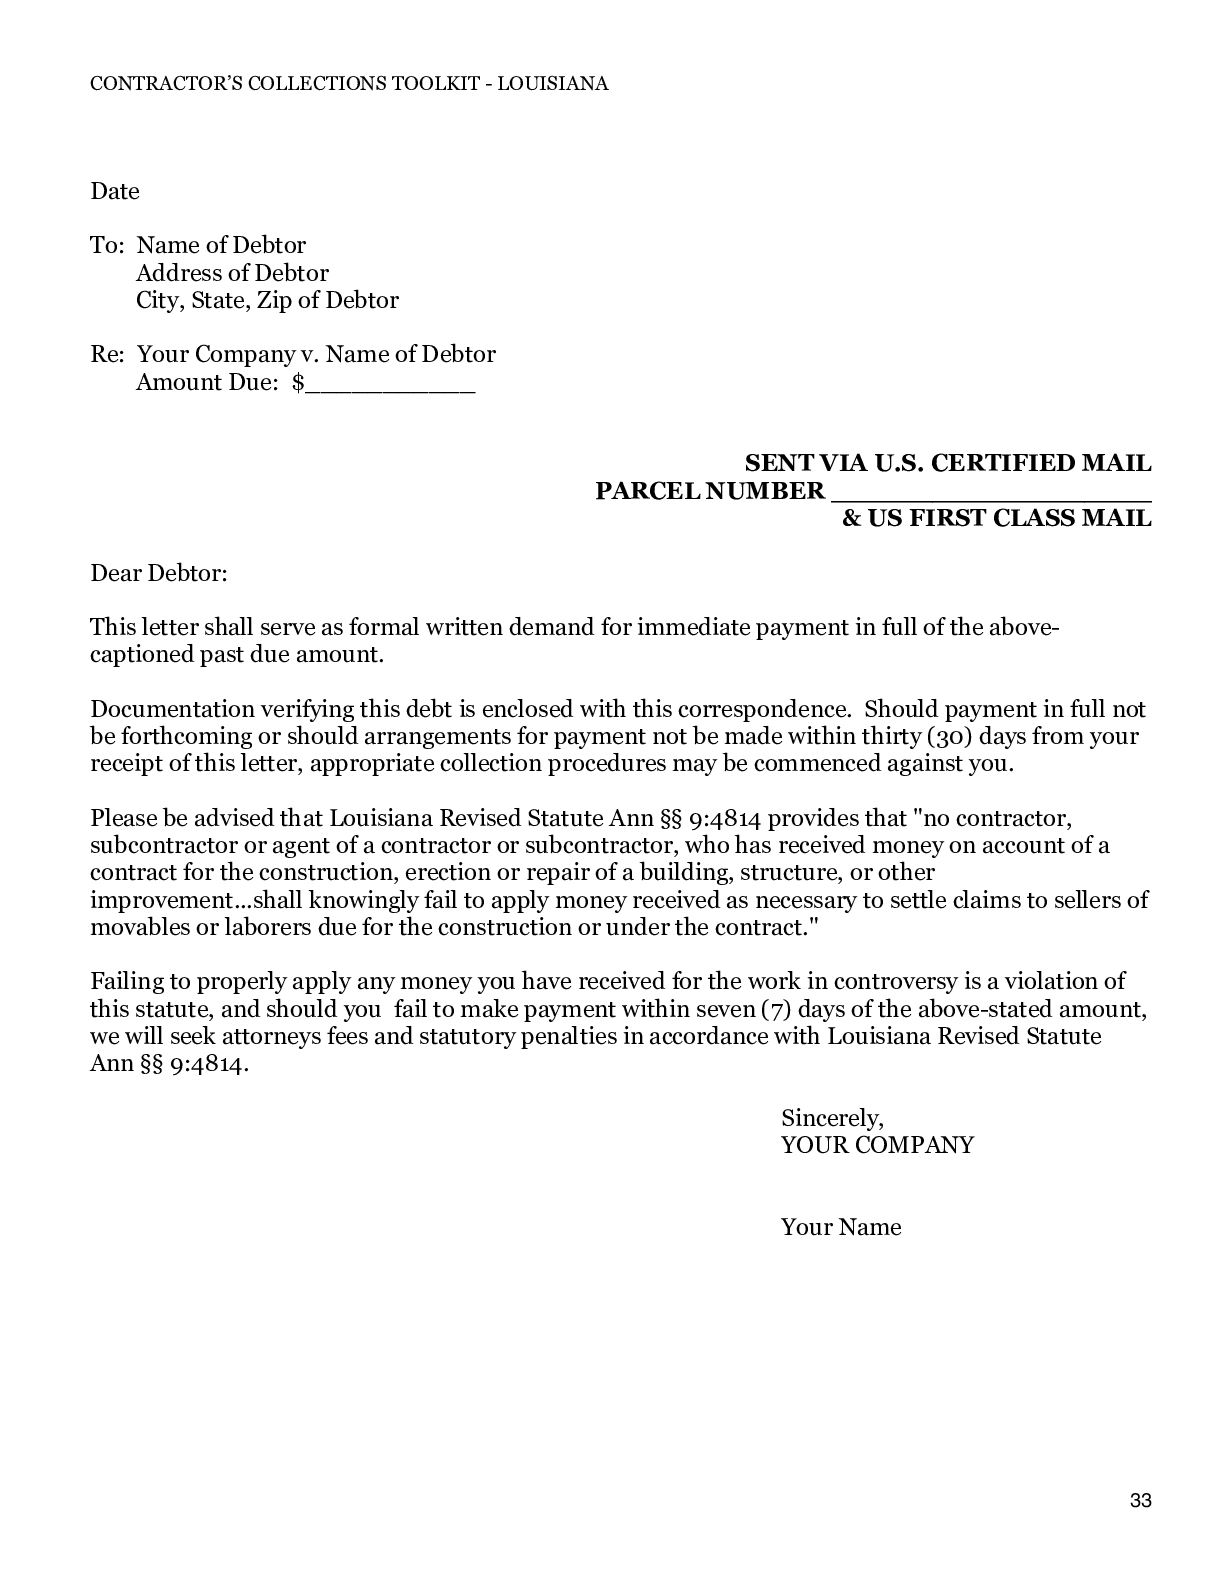 Louisiana Demand Letter on Misapplied Funds – Free Template - free from